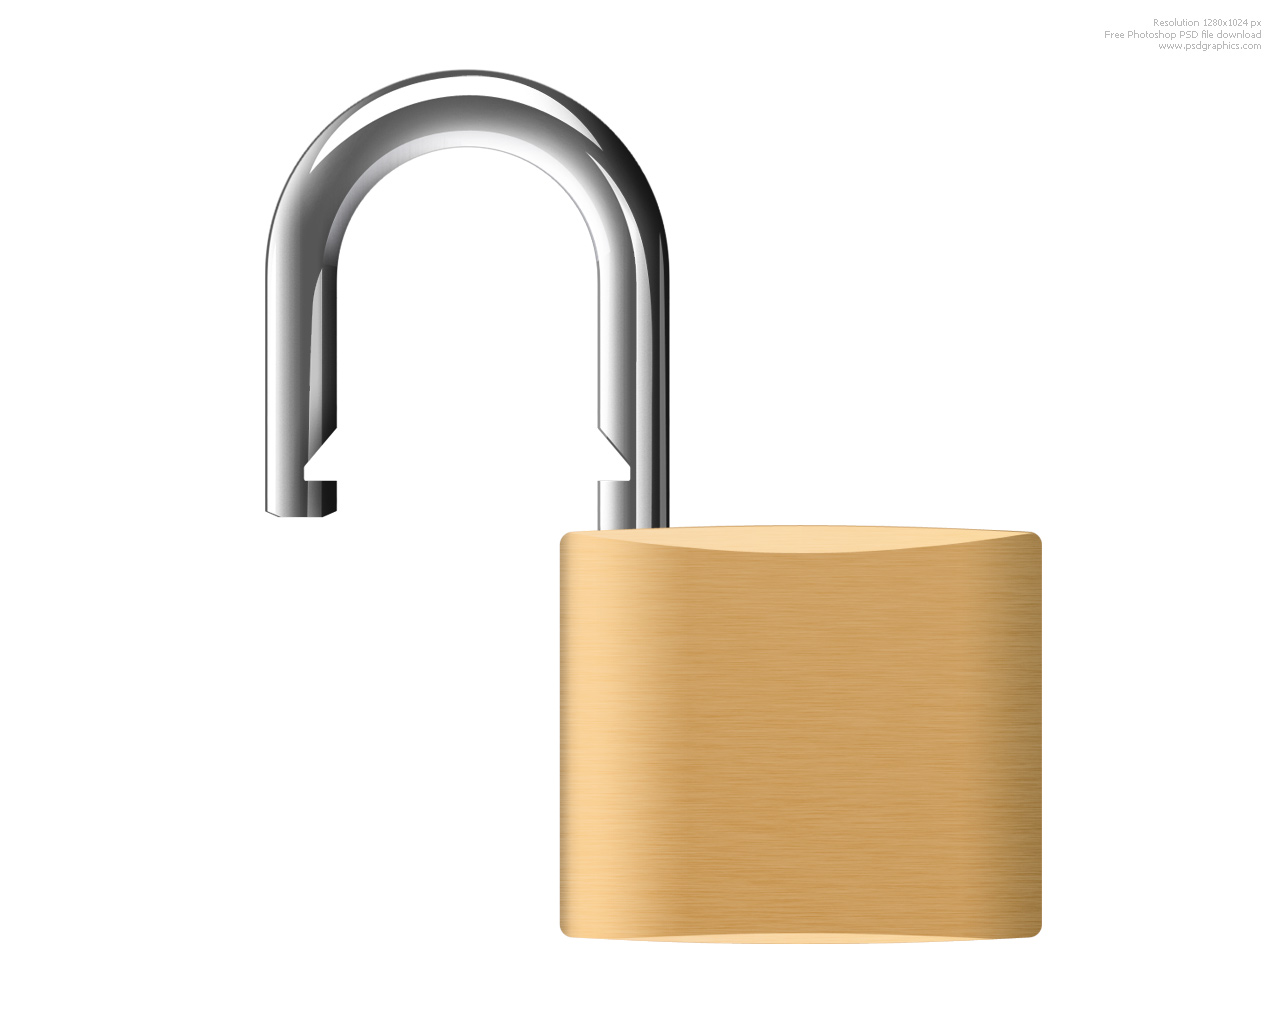 26 Padlock Image Free Cliparts That You Can Download To You Computer